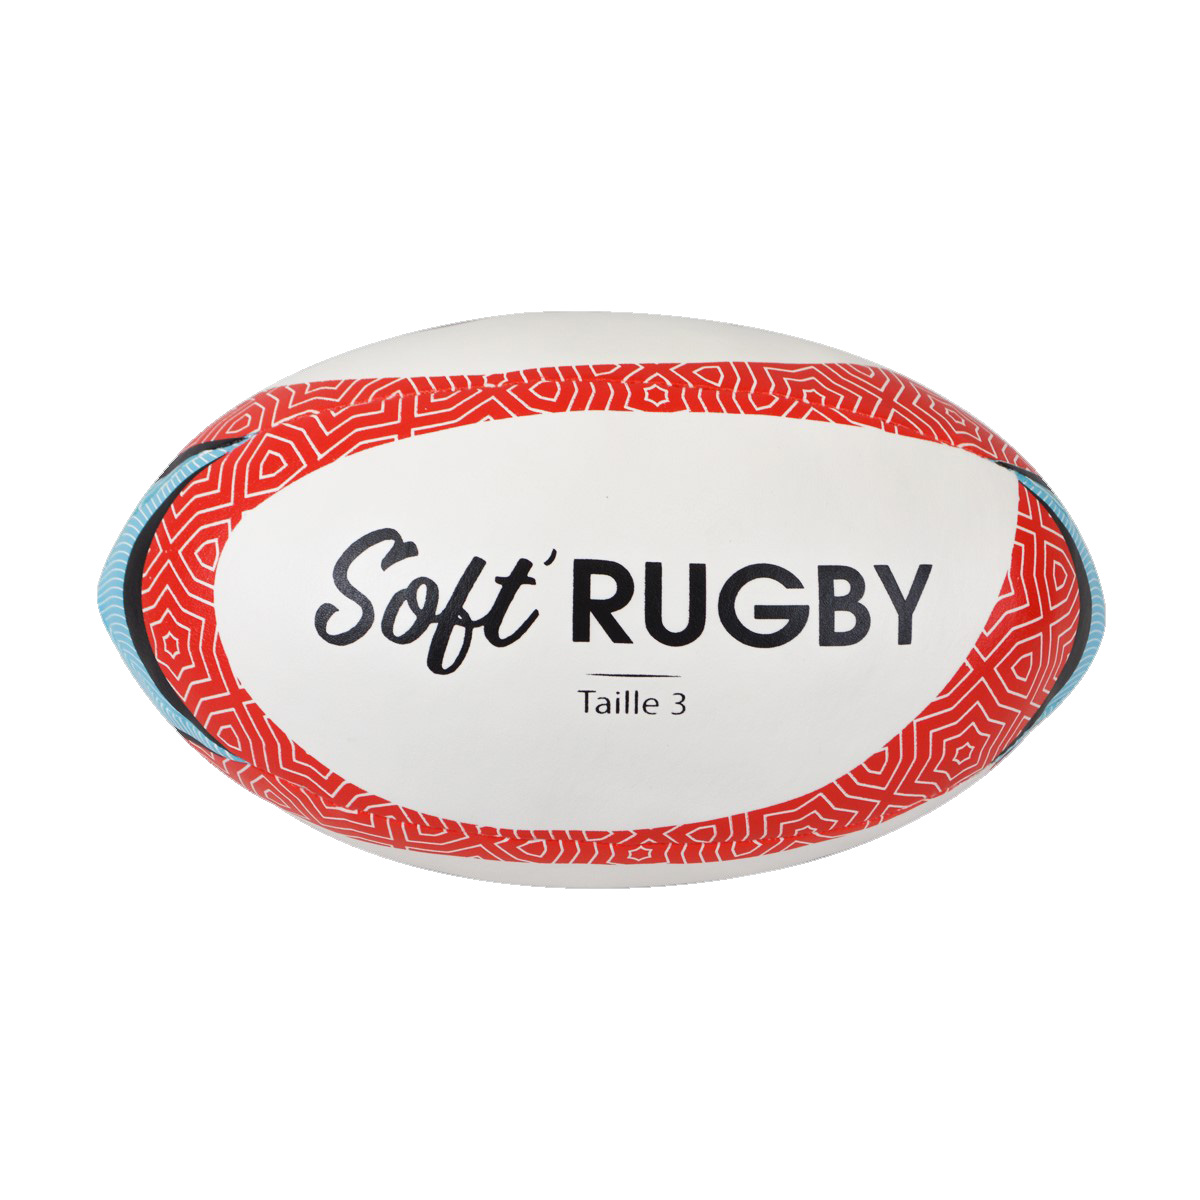 BALLON SOFT RUGBY TAILLE 3